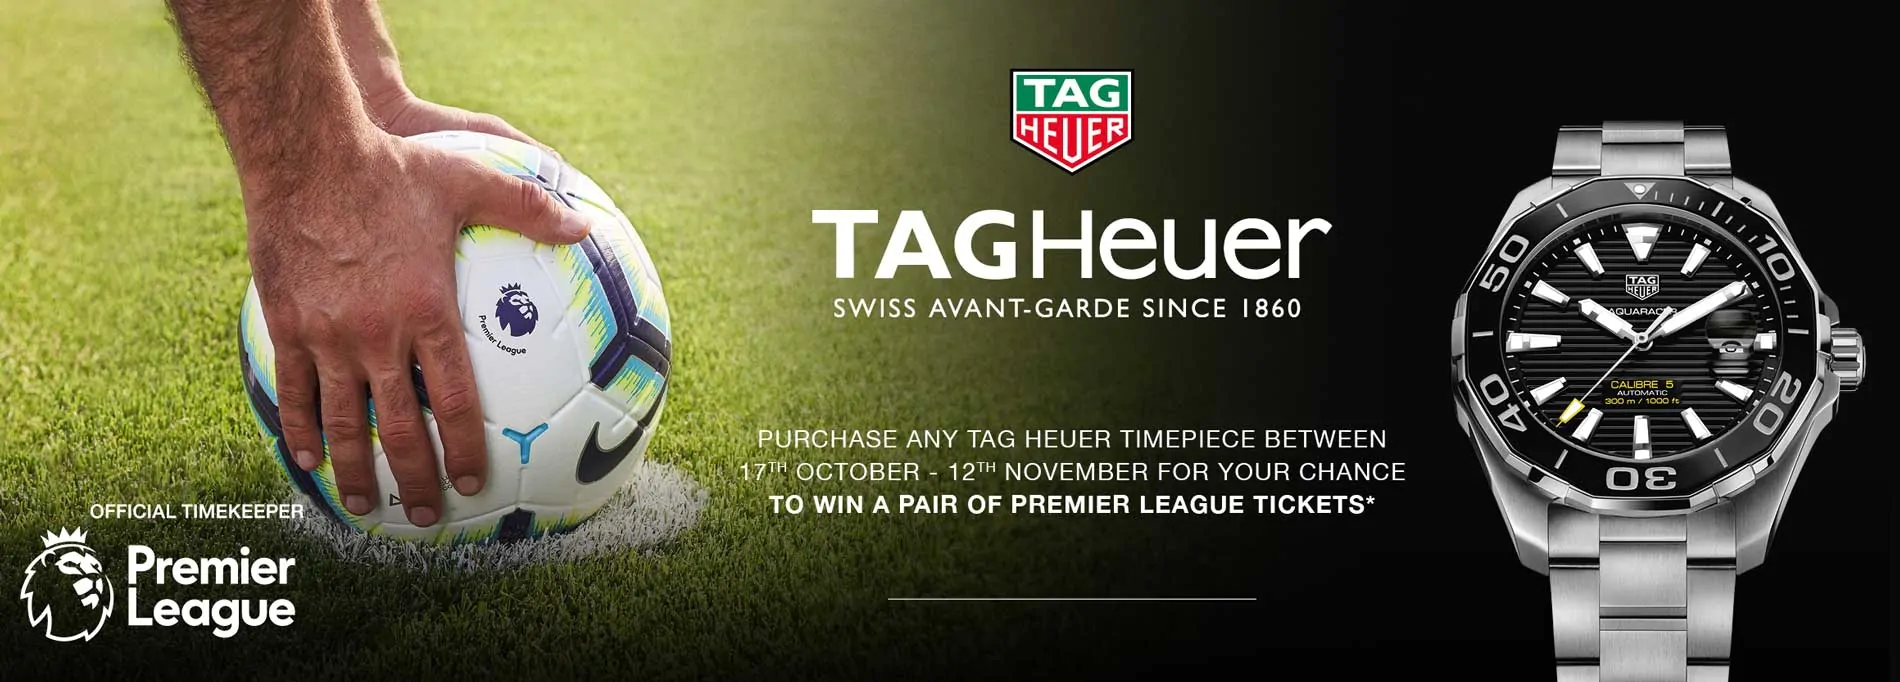 WIN PREMIER LEAGUE TICKETS WITH TAG HEUER